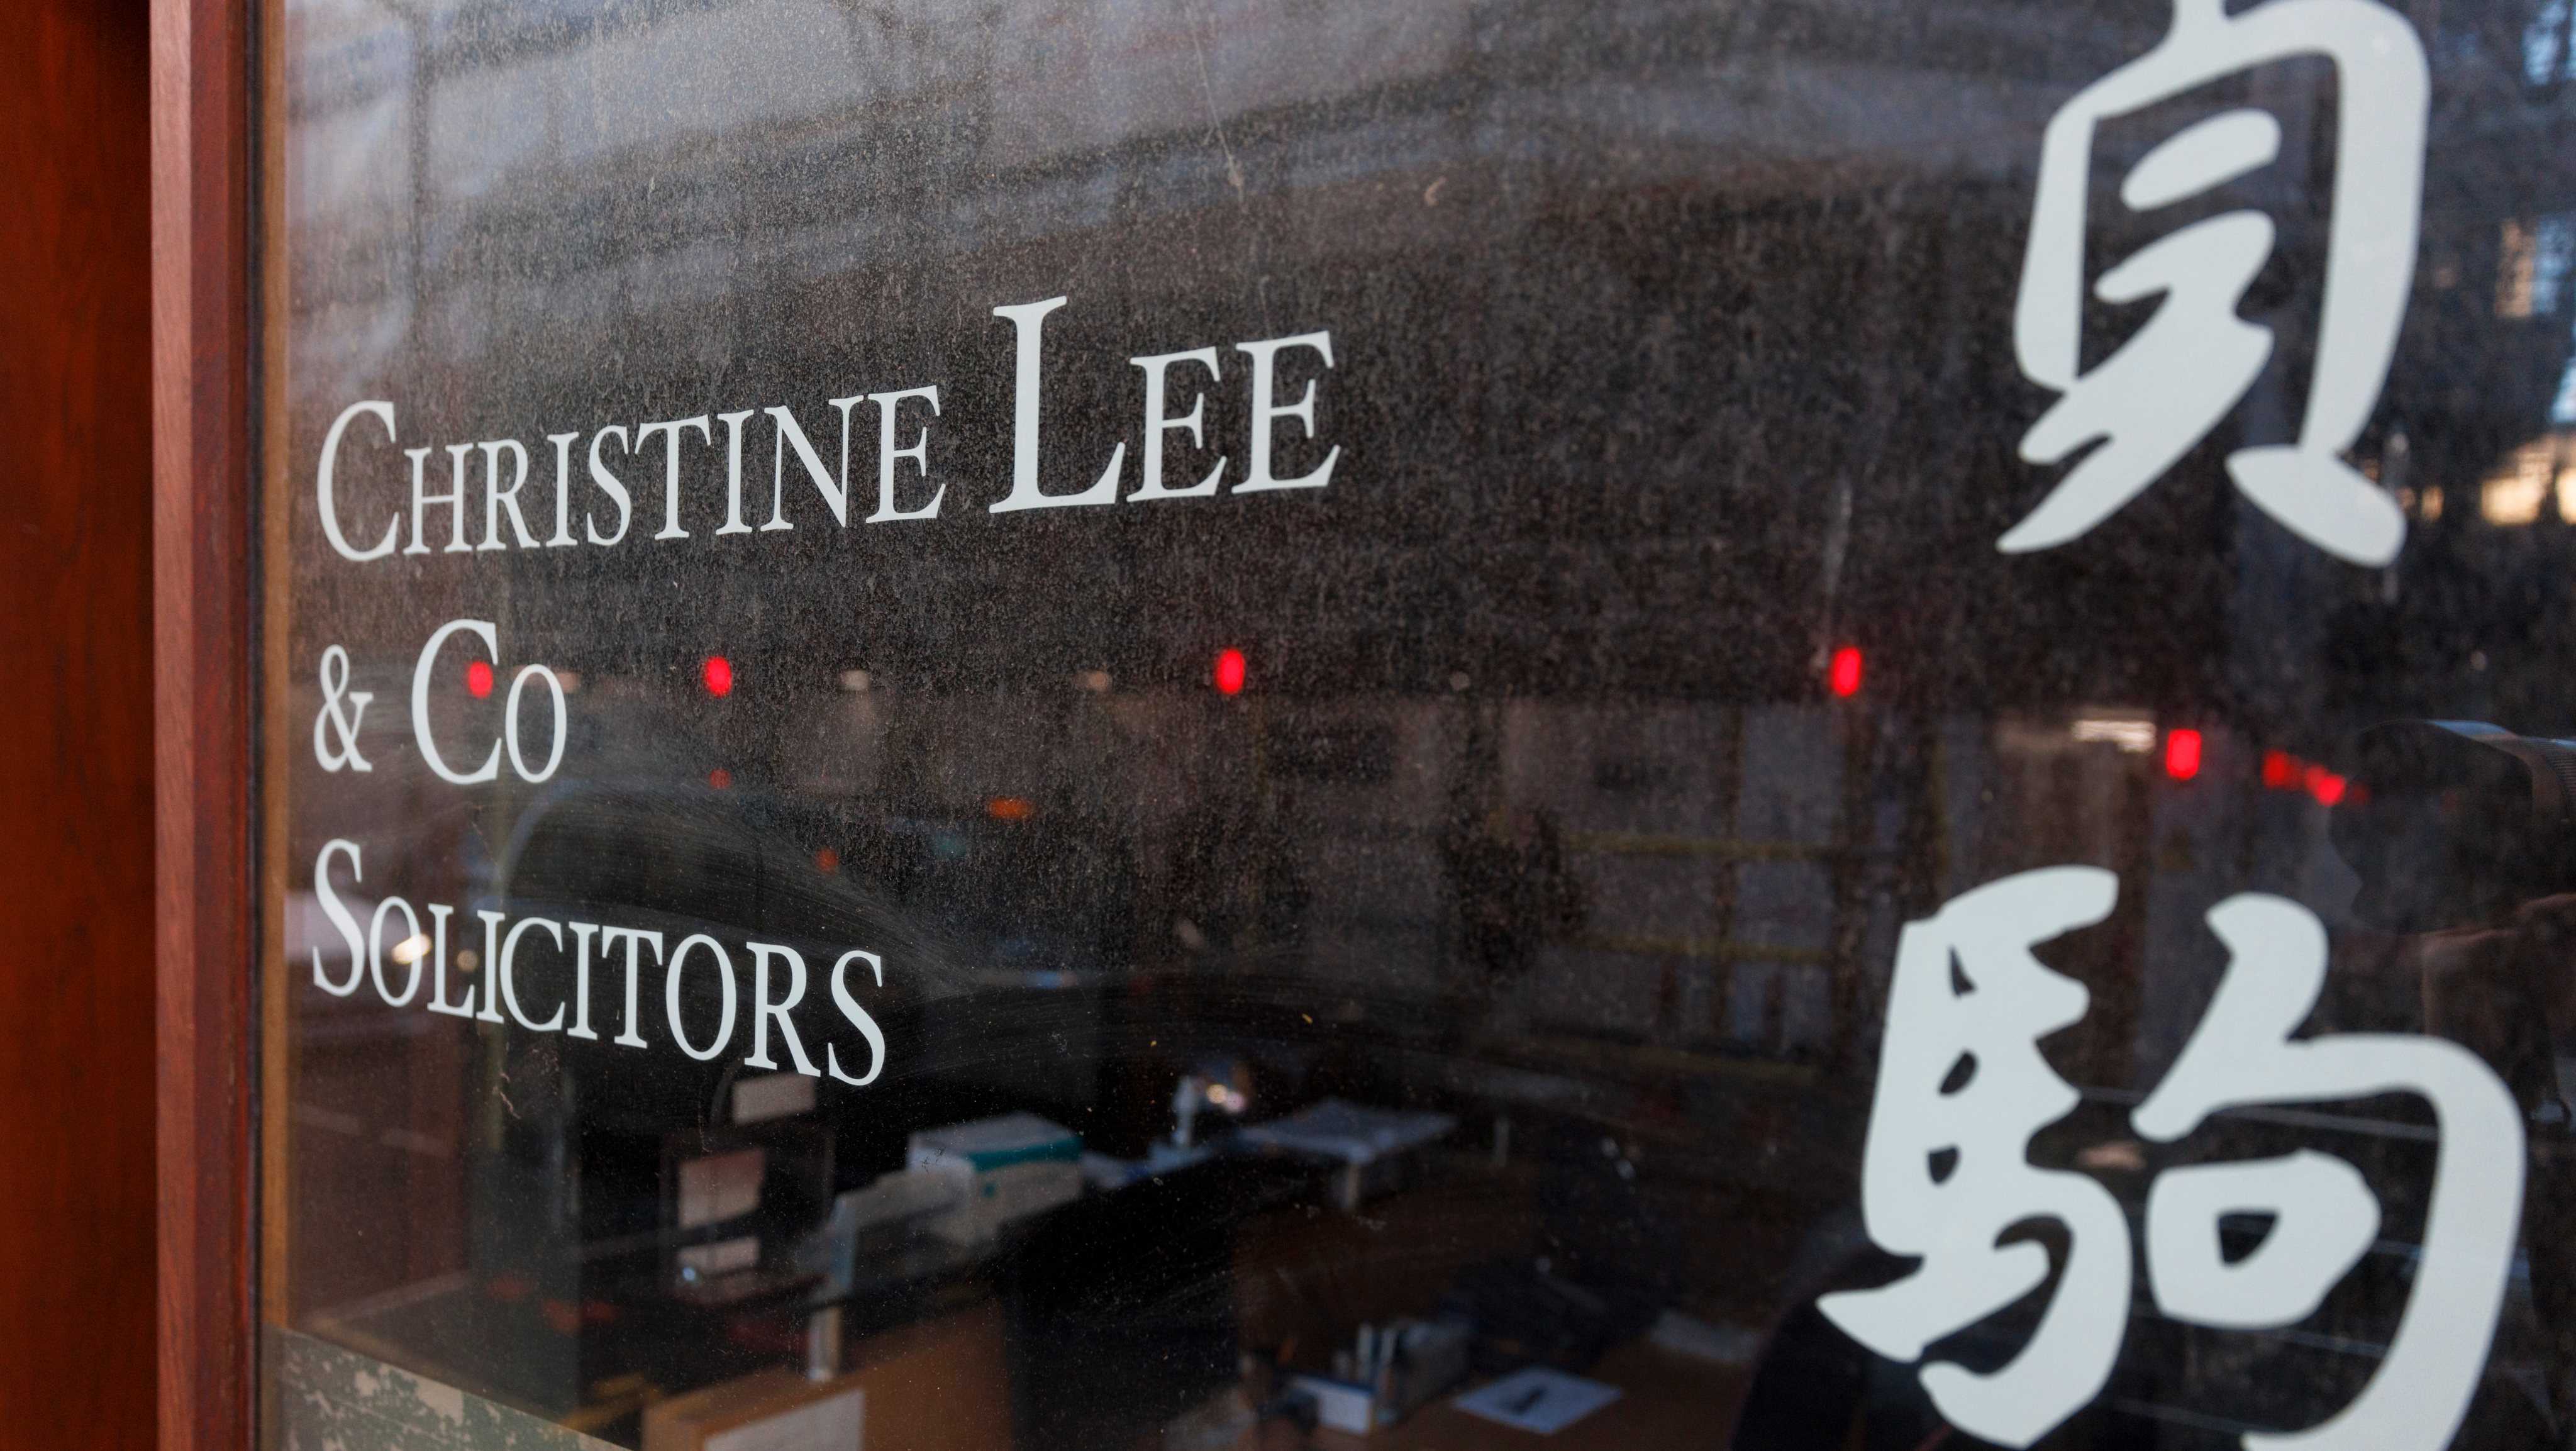 London Office Of Christine Lee Solicitors